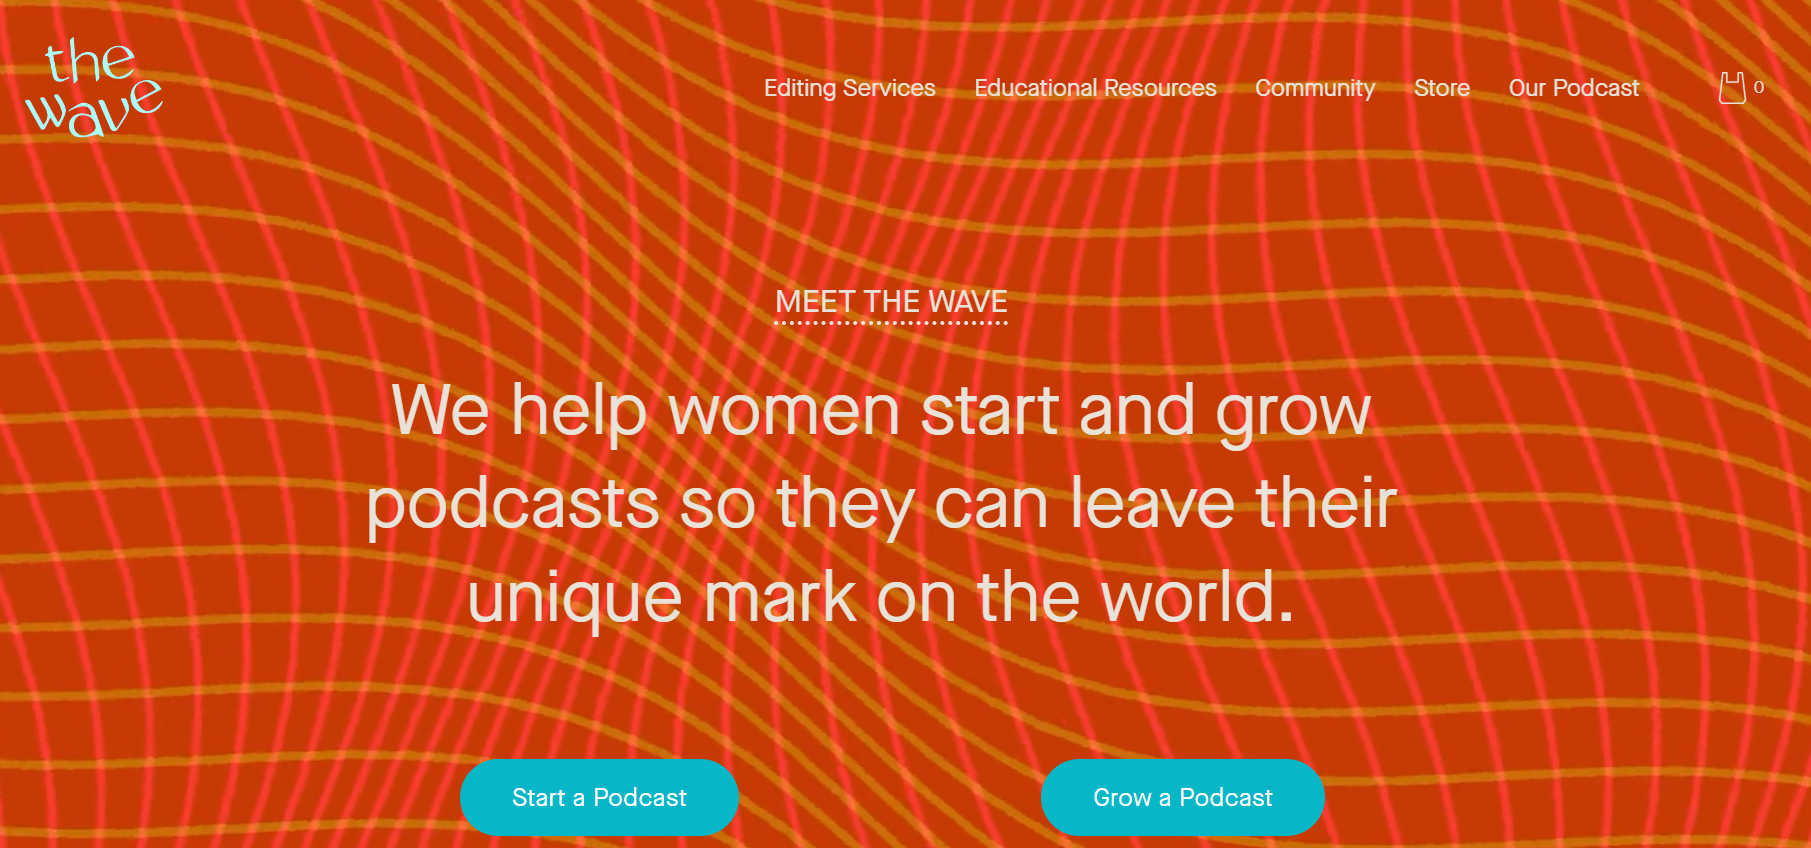 The Wave Home Page